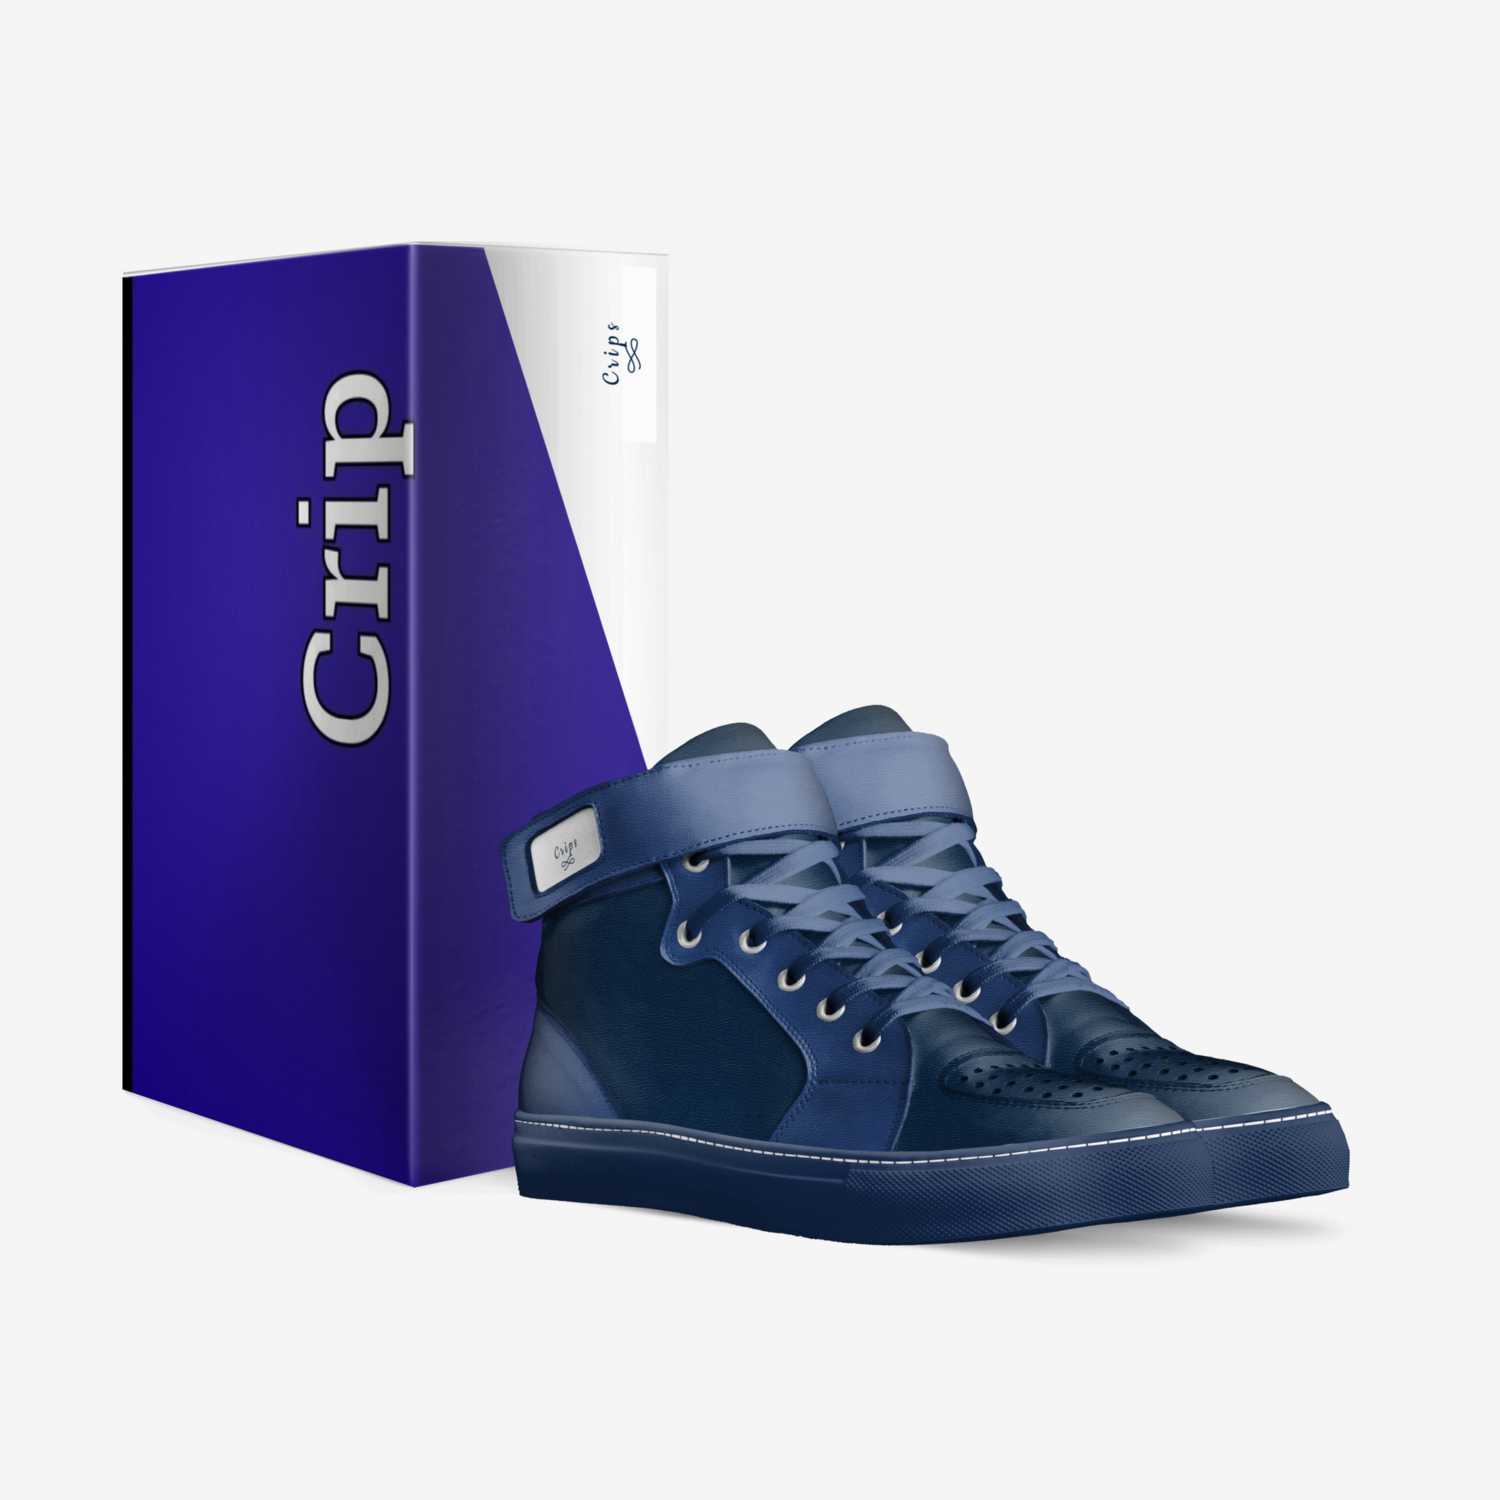 C r i p s custom made in Italy shoes by Claude Iii | Box view